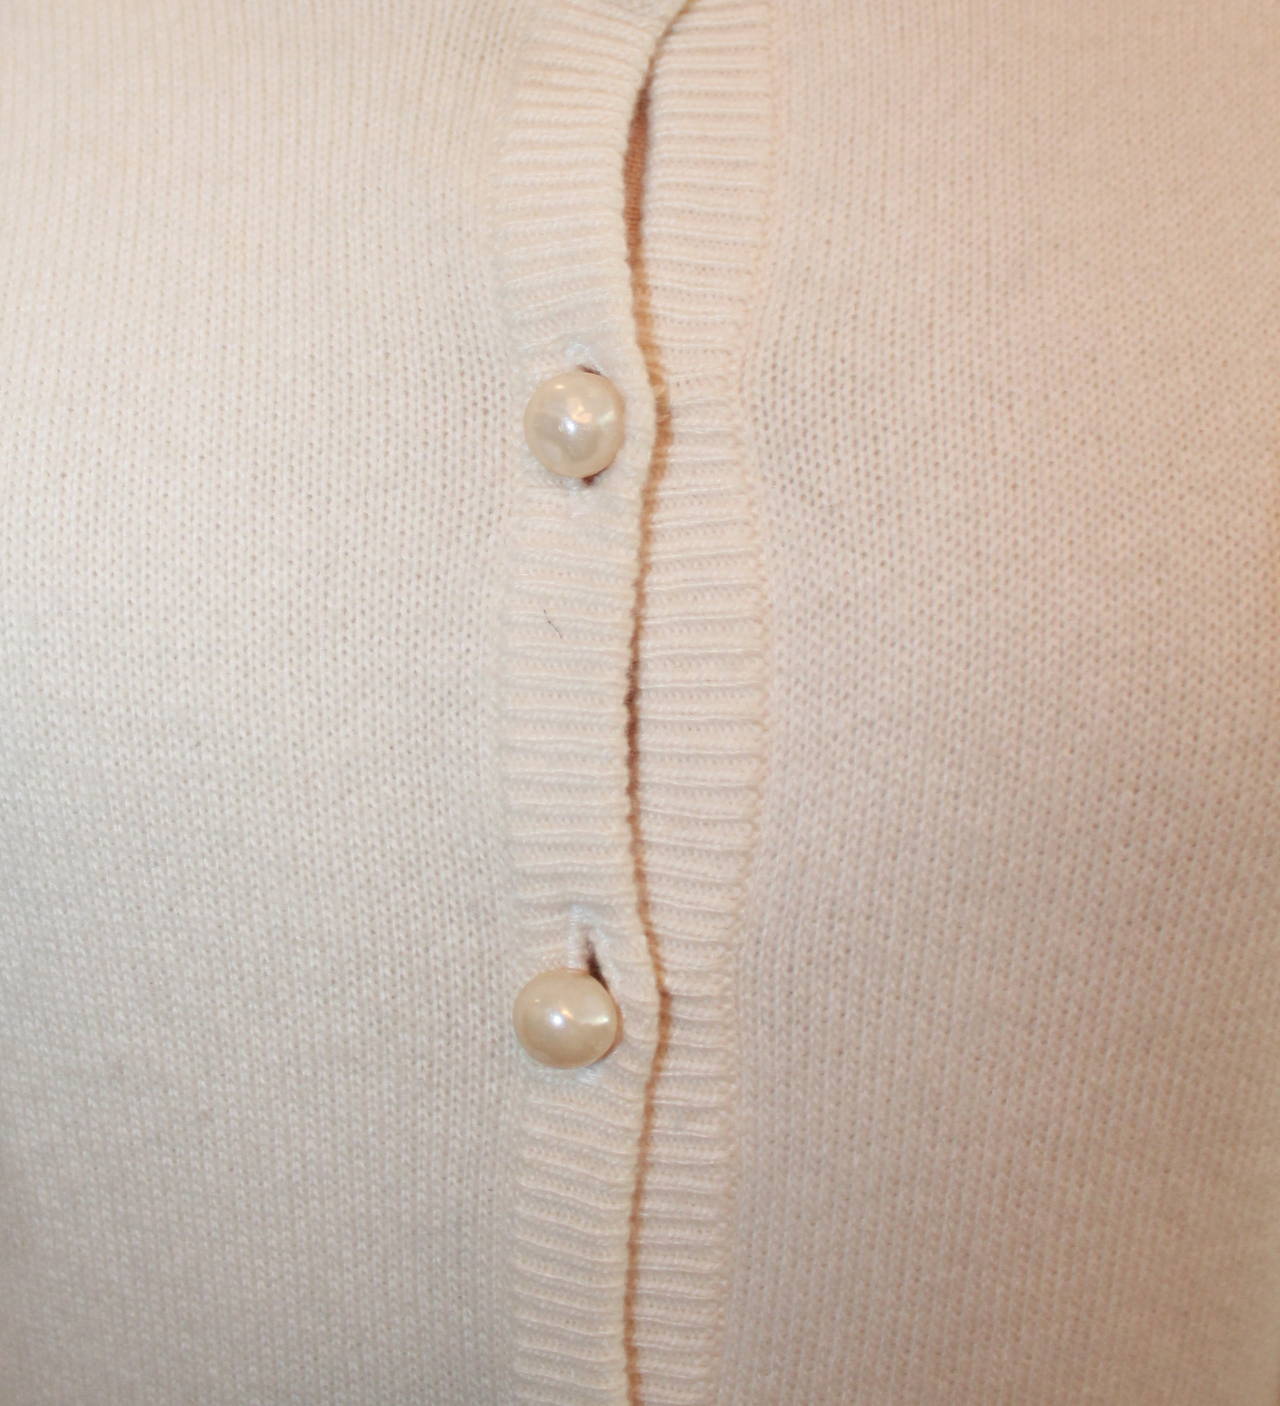 Gray Chanel 1980's Vintage Creme Cashmere Sweater with Pearl Buttons - L